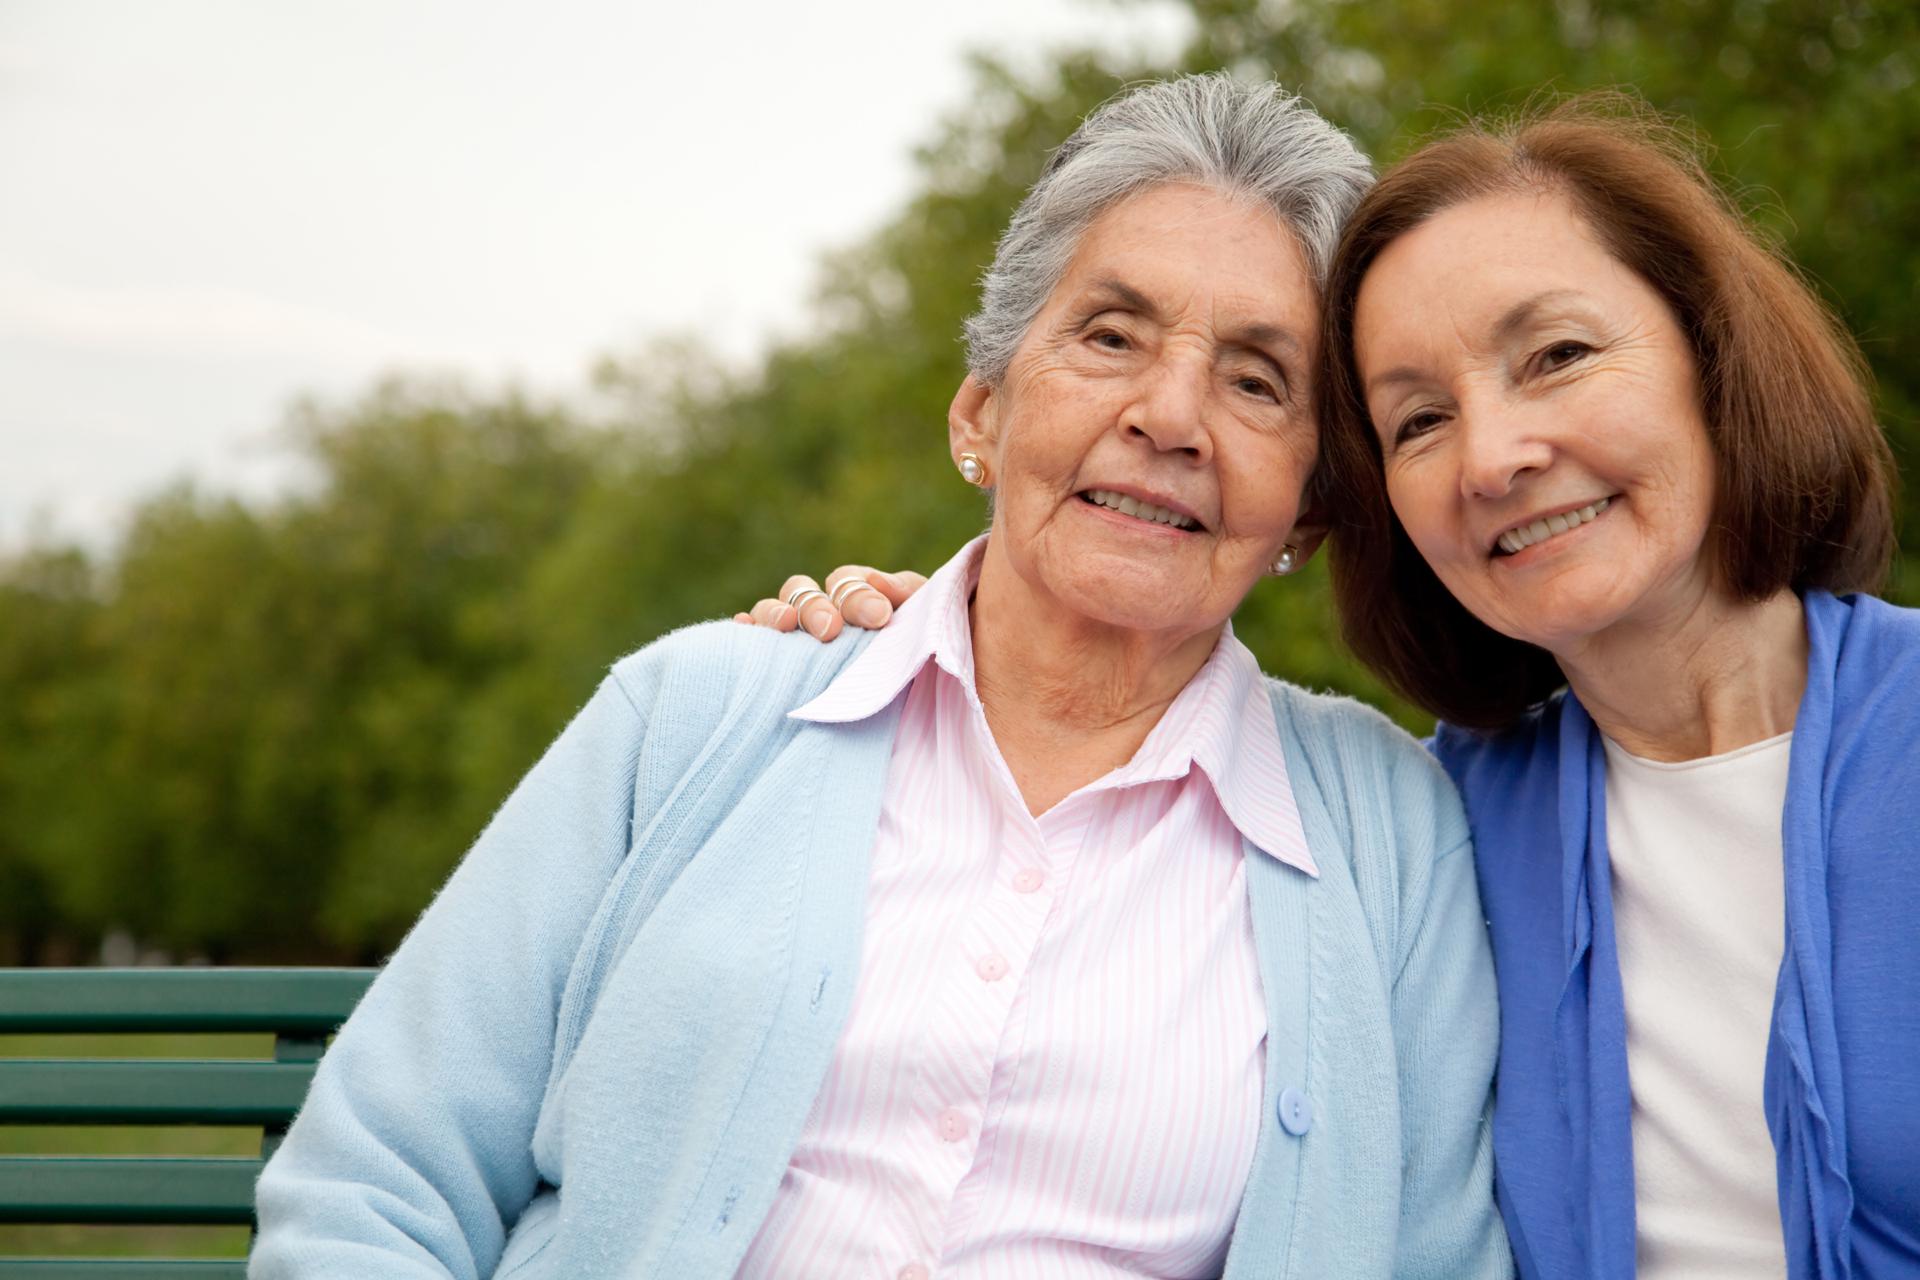 Older woman and mature daughter sit on a bench with their heads leaning in toward each other.